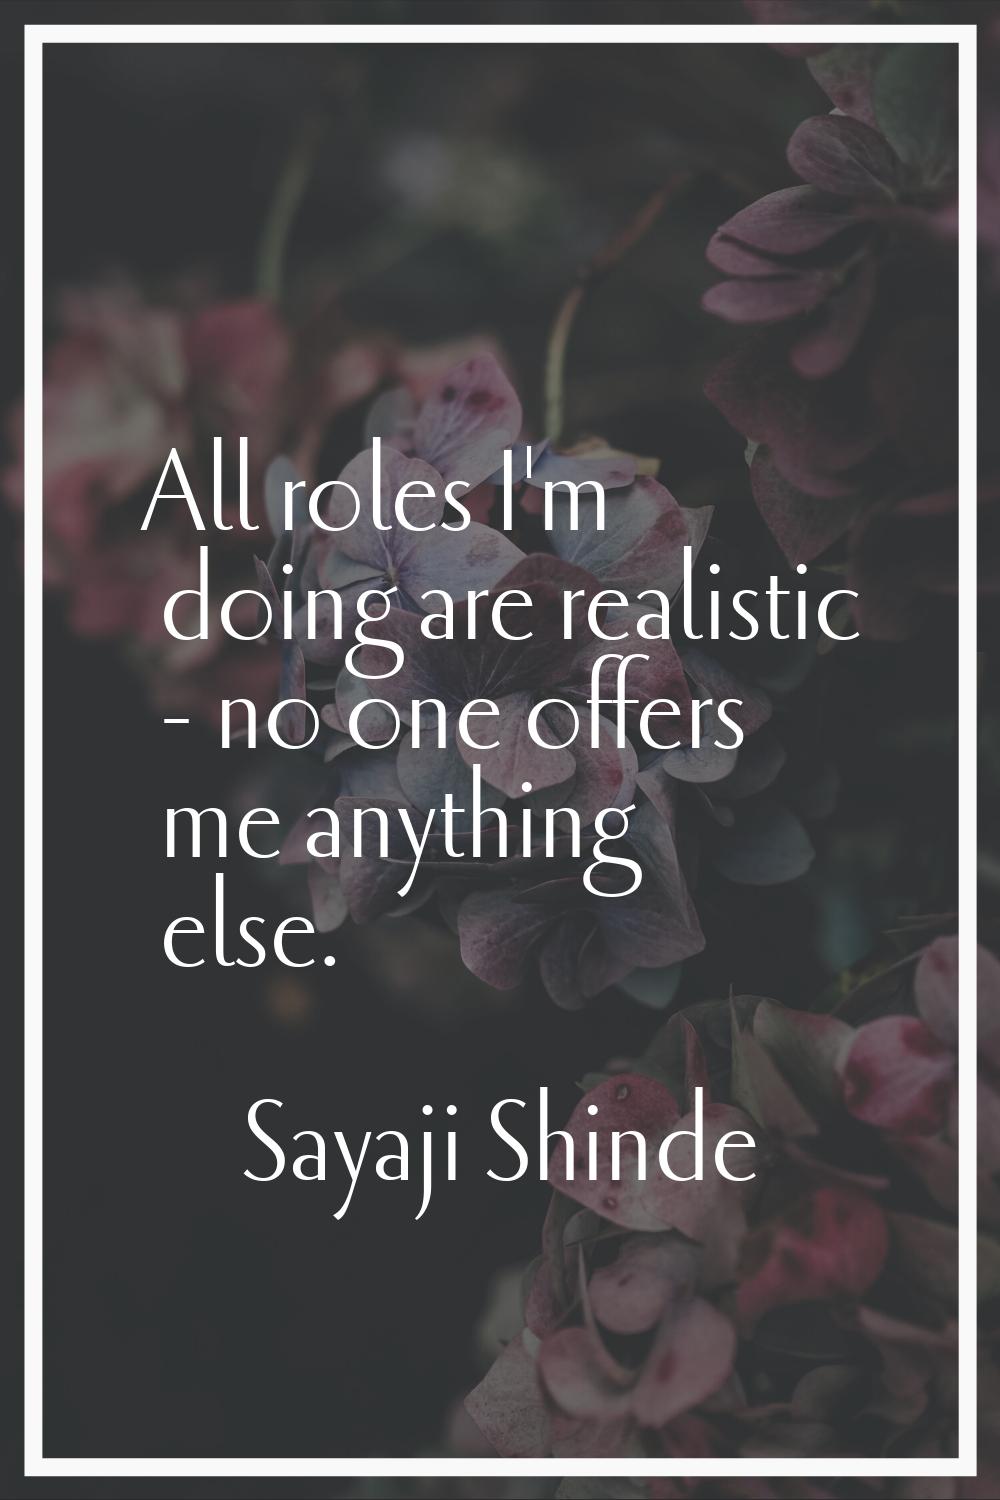 All roles I'm doing are realistic - no one offers me anything else.